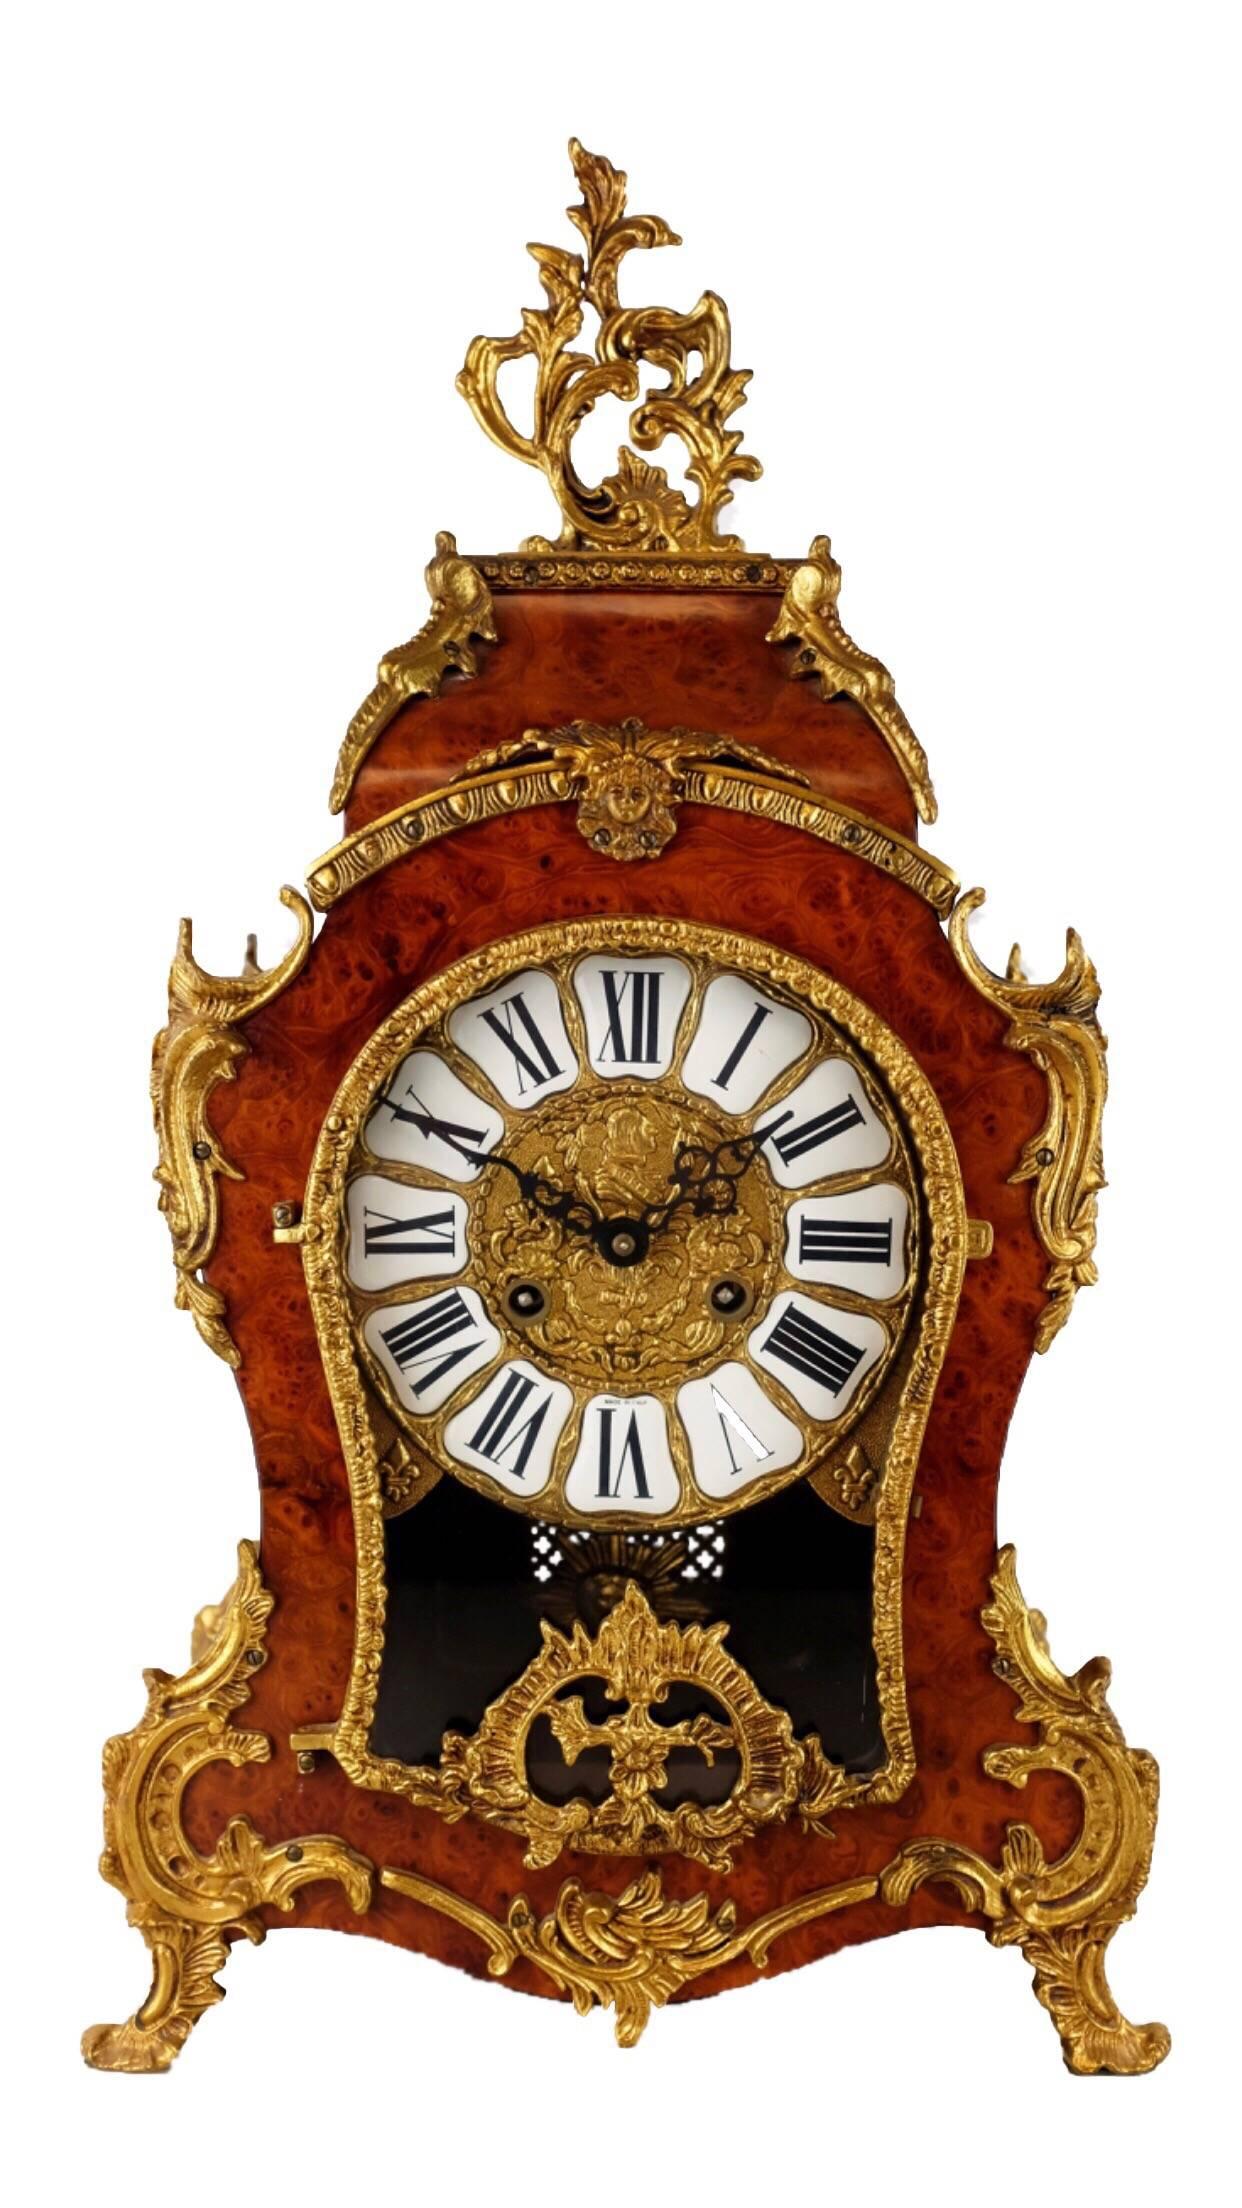 Decorative 20th century walnut veneered bracket clock and pedestal with applied gilt mounts.
The 8 day Ting Tang movement with Sunburst pendulum. strikes the hours and half's on dual bells.